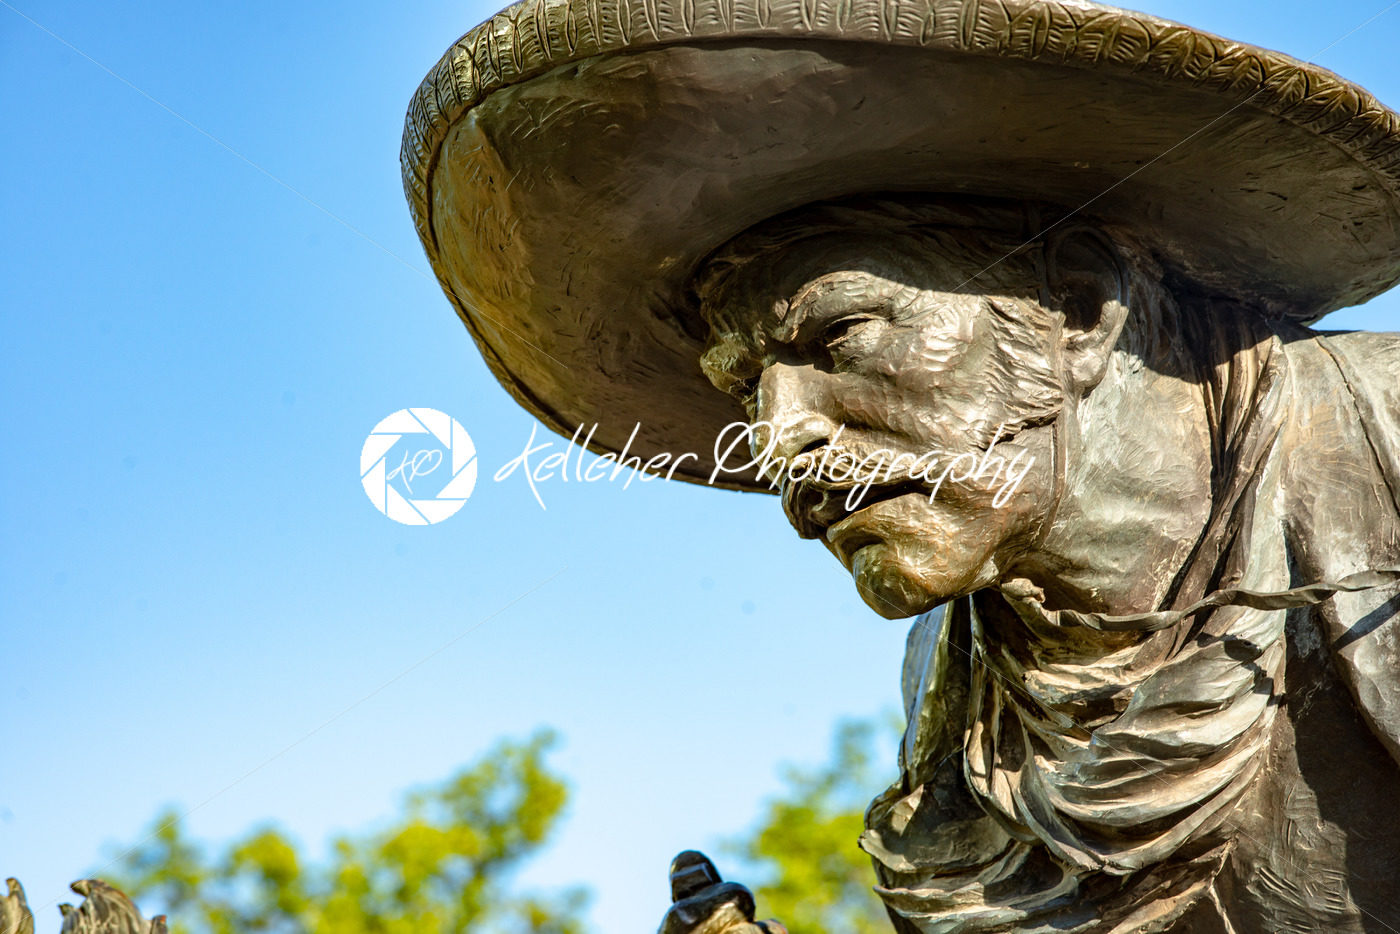 Dallas, Texas – May 7, 2018: Cowboy and longhorn cows with cattle in the background, as part of a landmark bronze cattle sculpture - Kelleher Photography Store